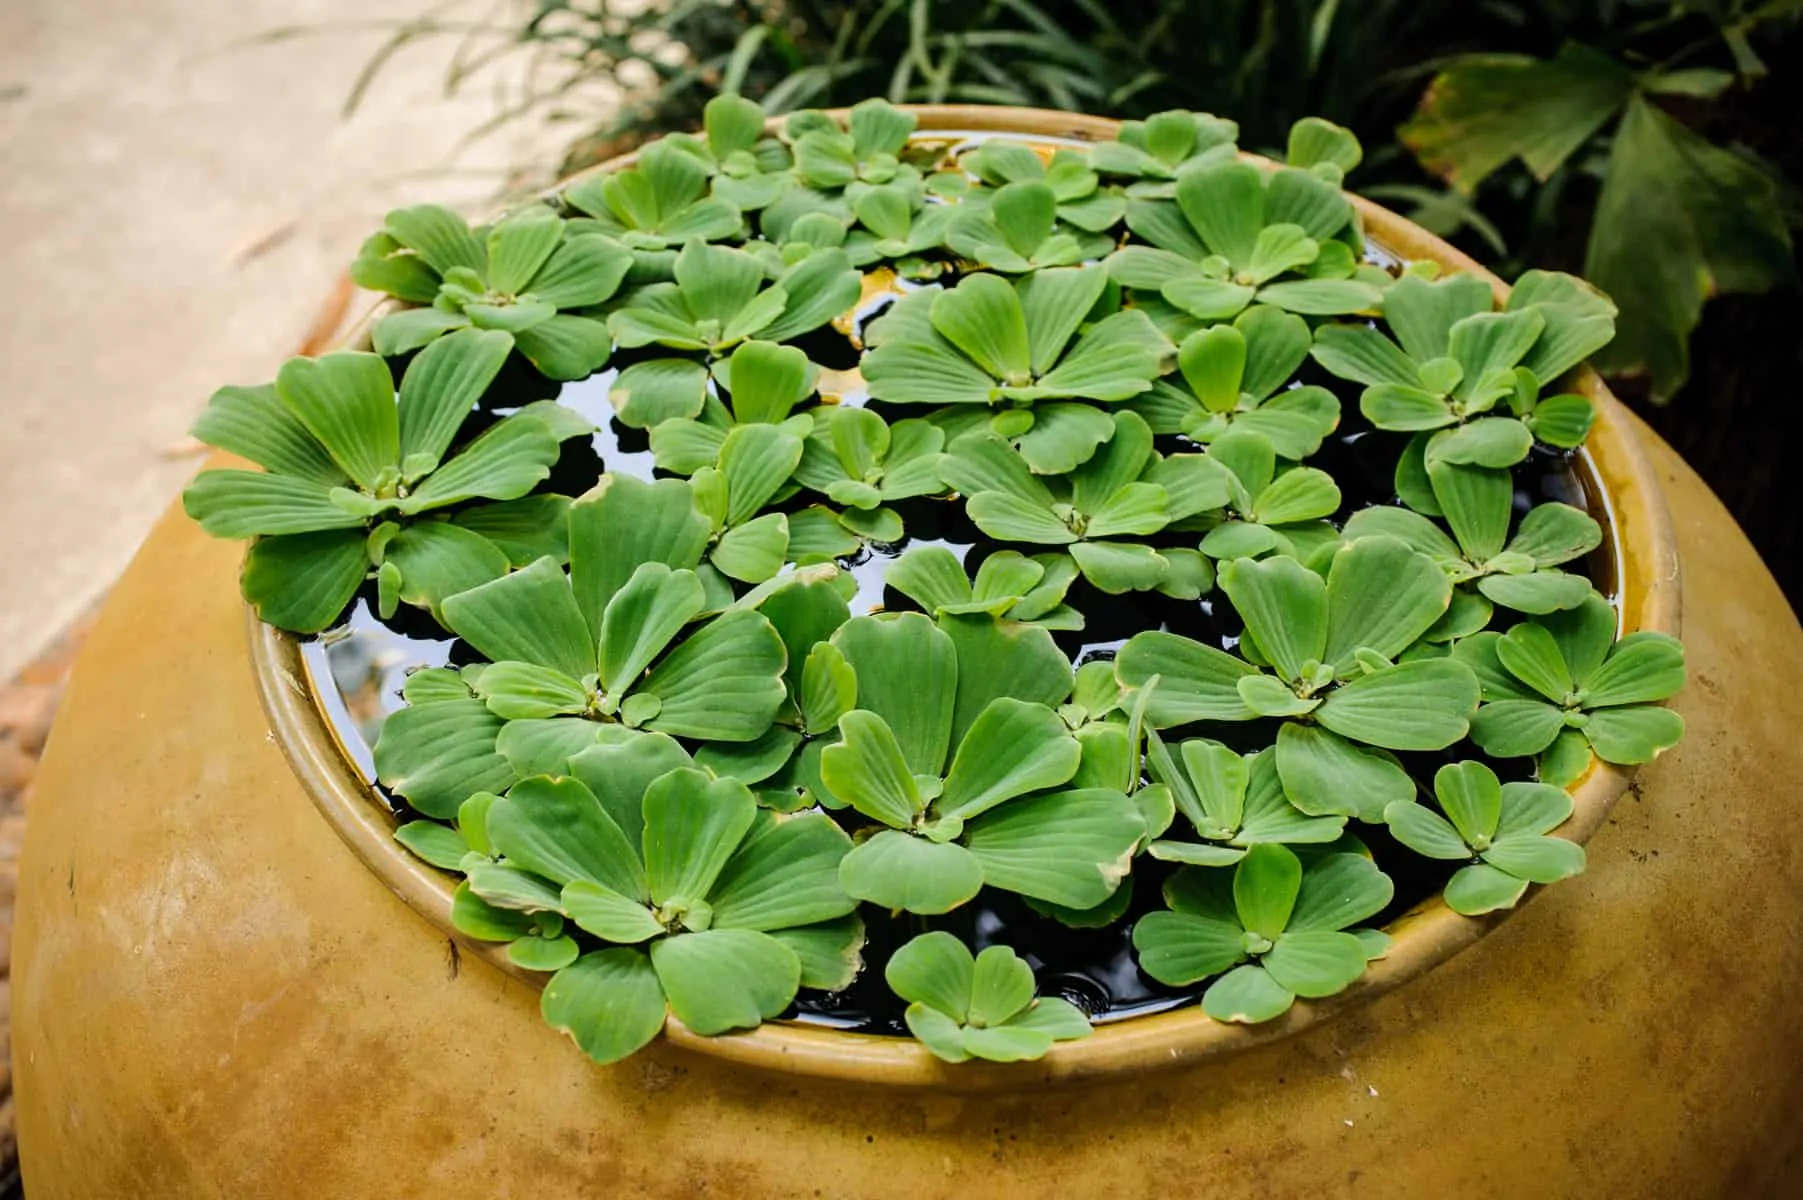 Caring for Dwarf Water Lettuce: lighting, humidity, and supplements